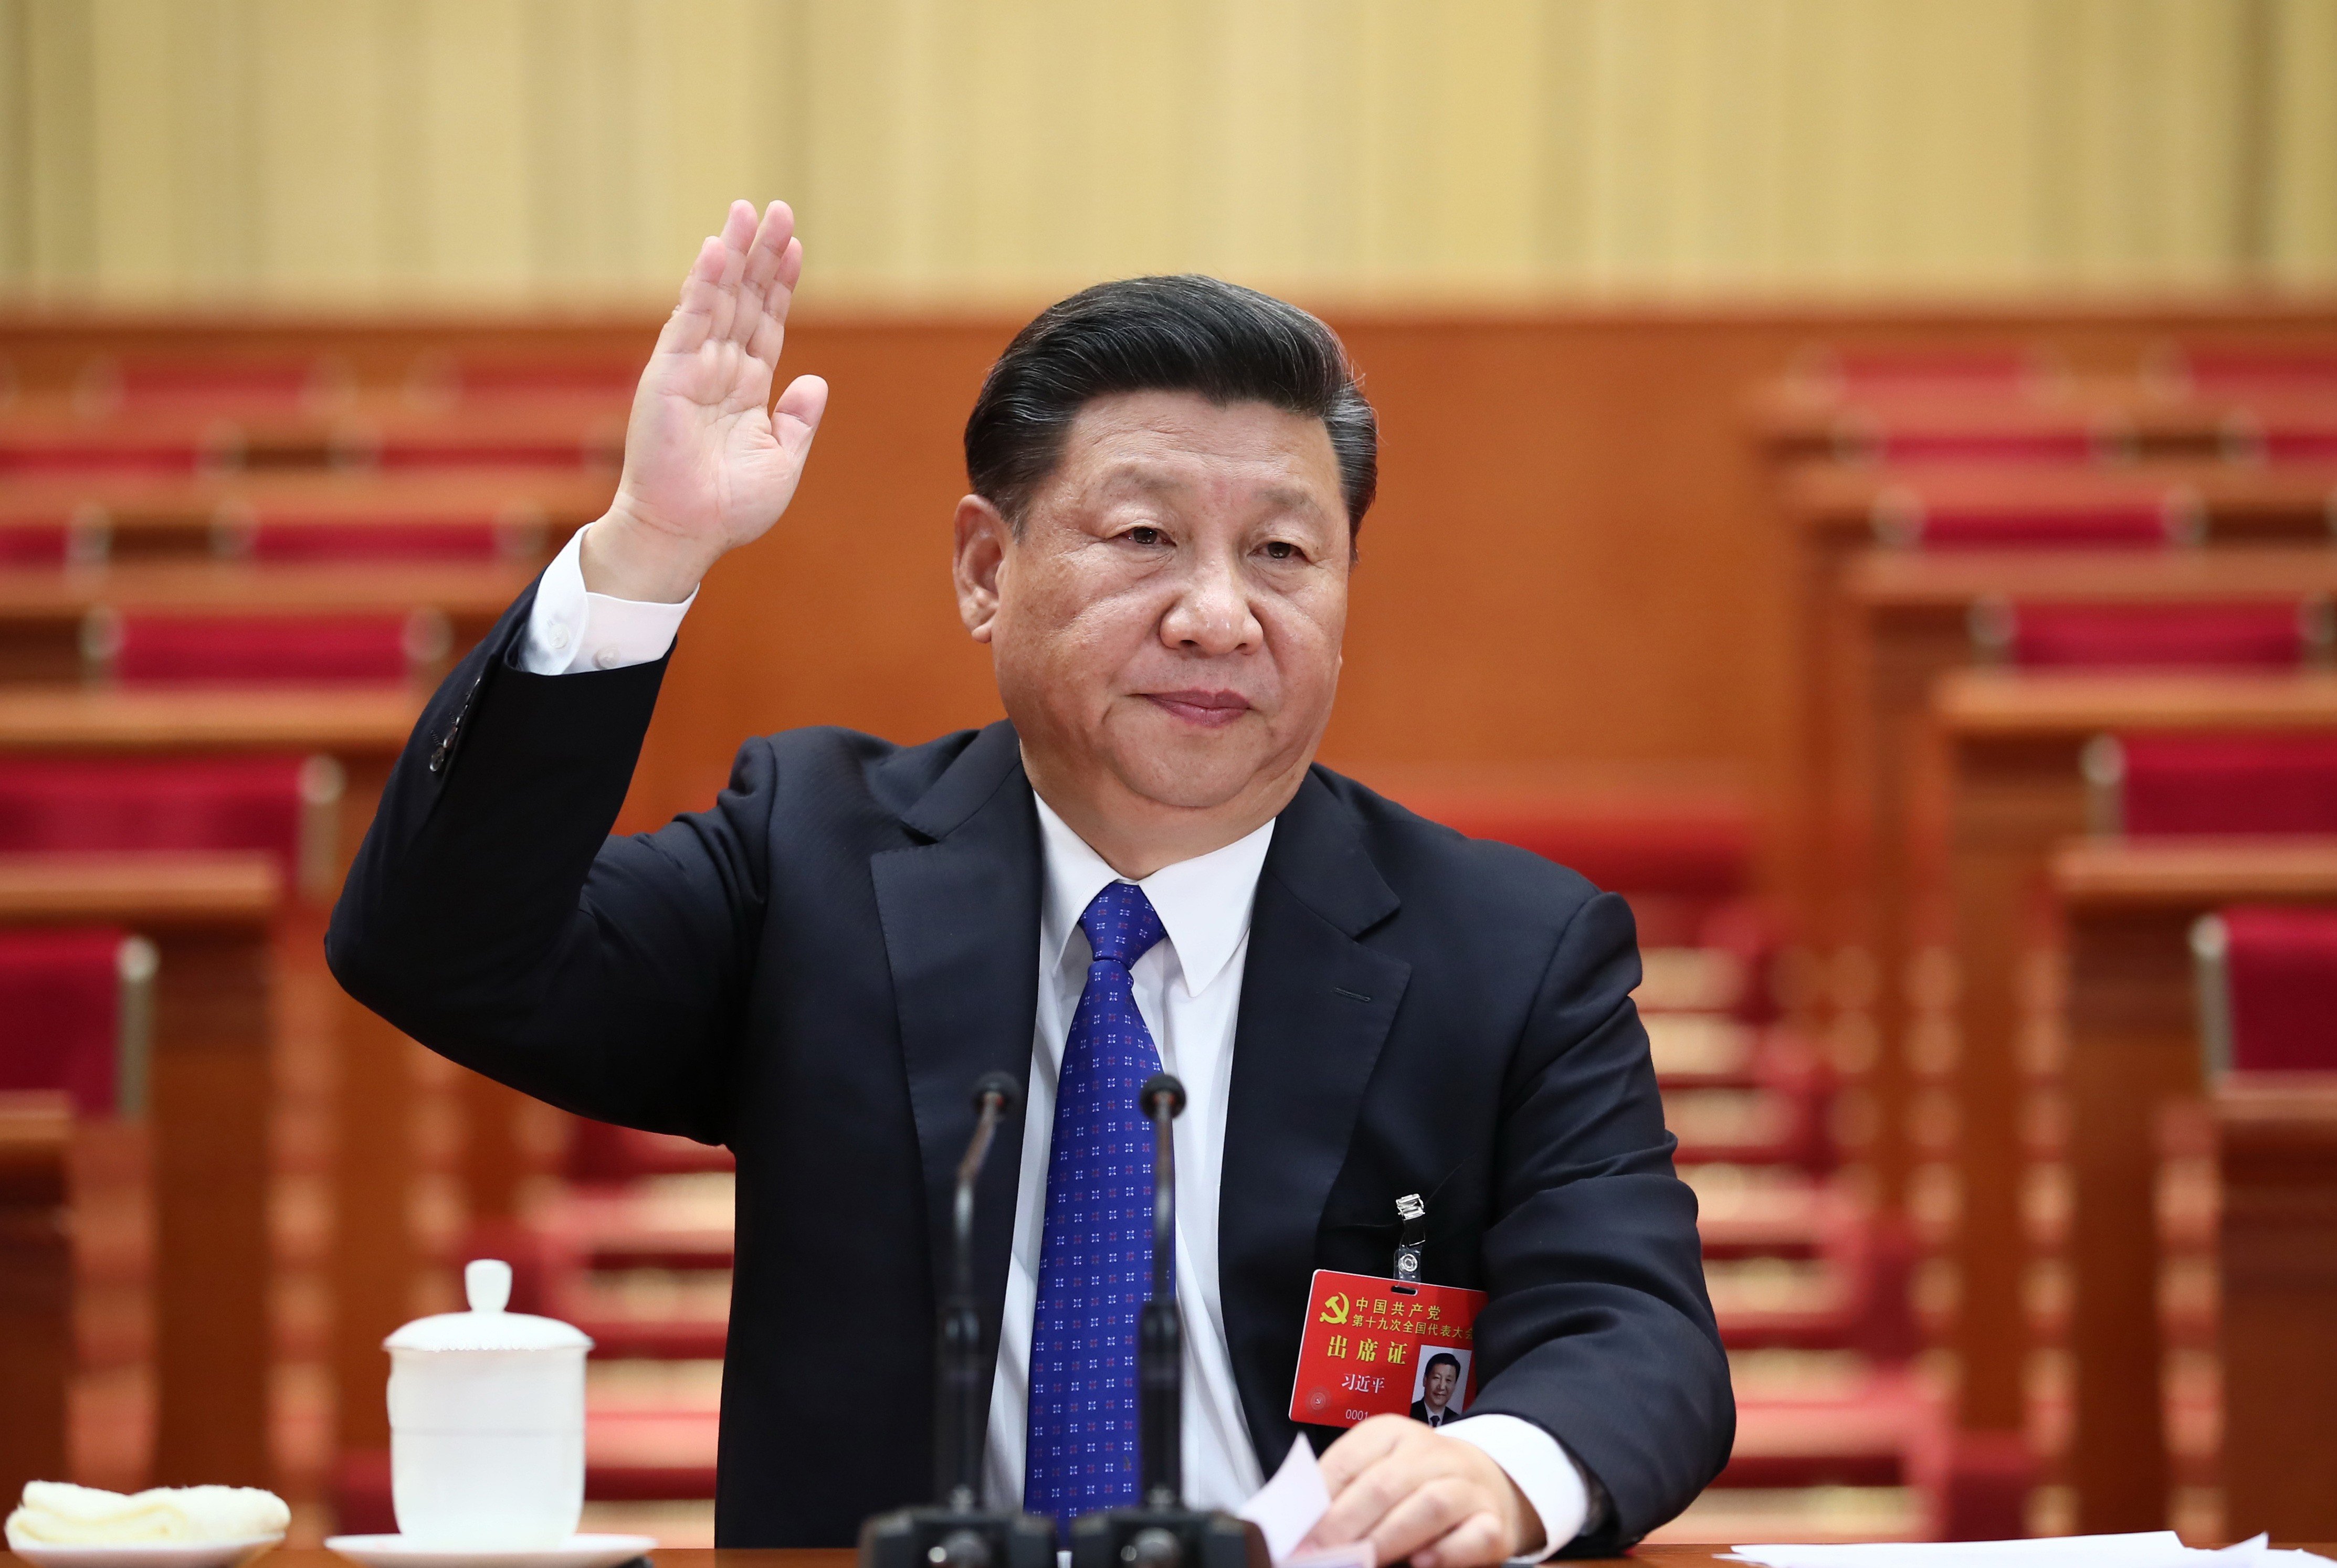 Along with the special administrative region of Macau, Hong Kong was mentioned no fewer than three times in President Xi Jinping’s speech. Photo: Xinhua